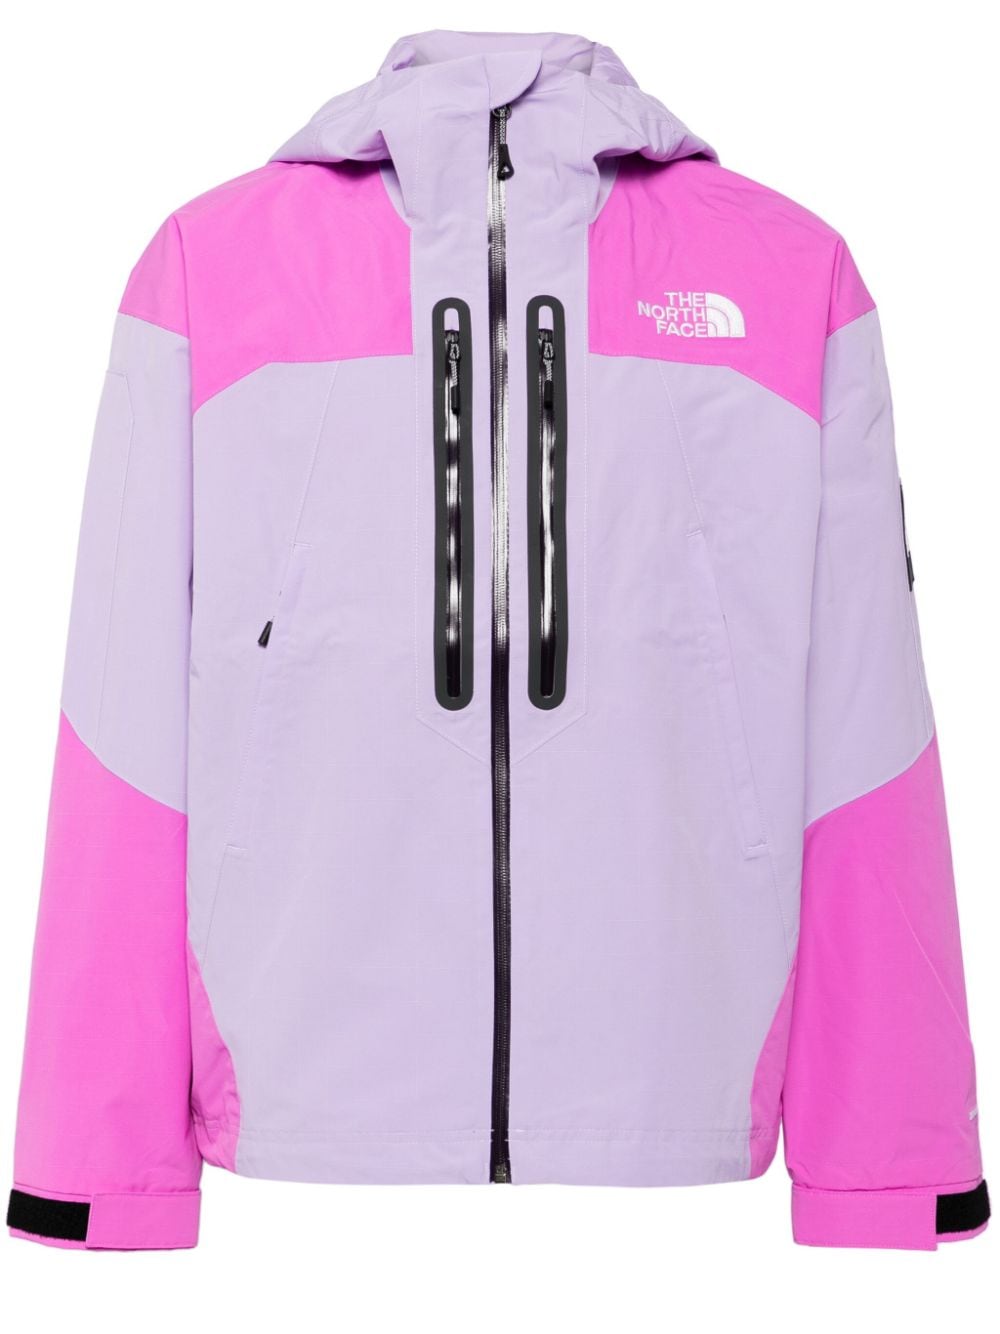 Image 1 of The North Face Transverse 2L DryVent™ hooded jacket